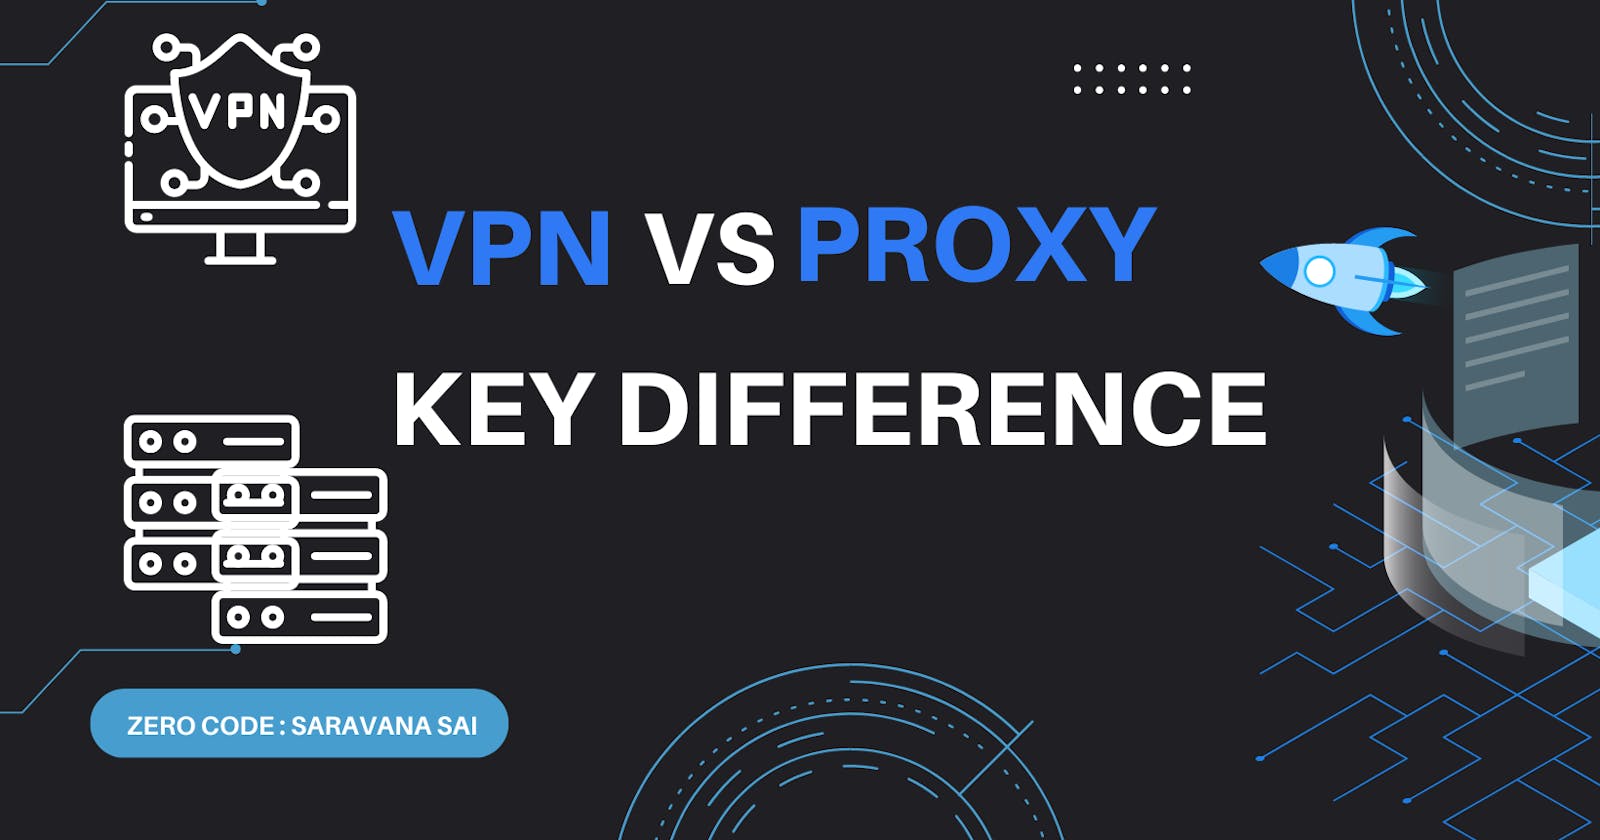 Proxy vs VPN: What Is the Difference?